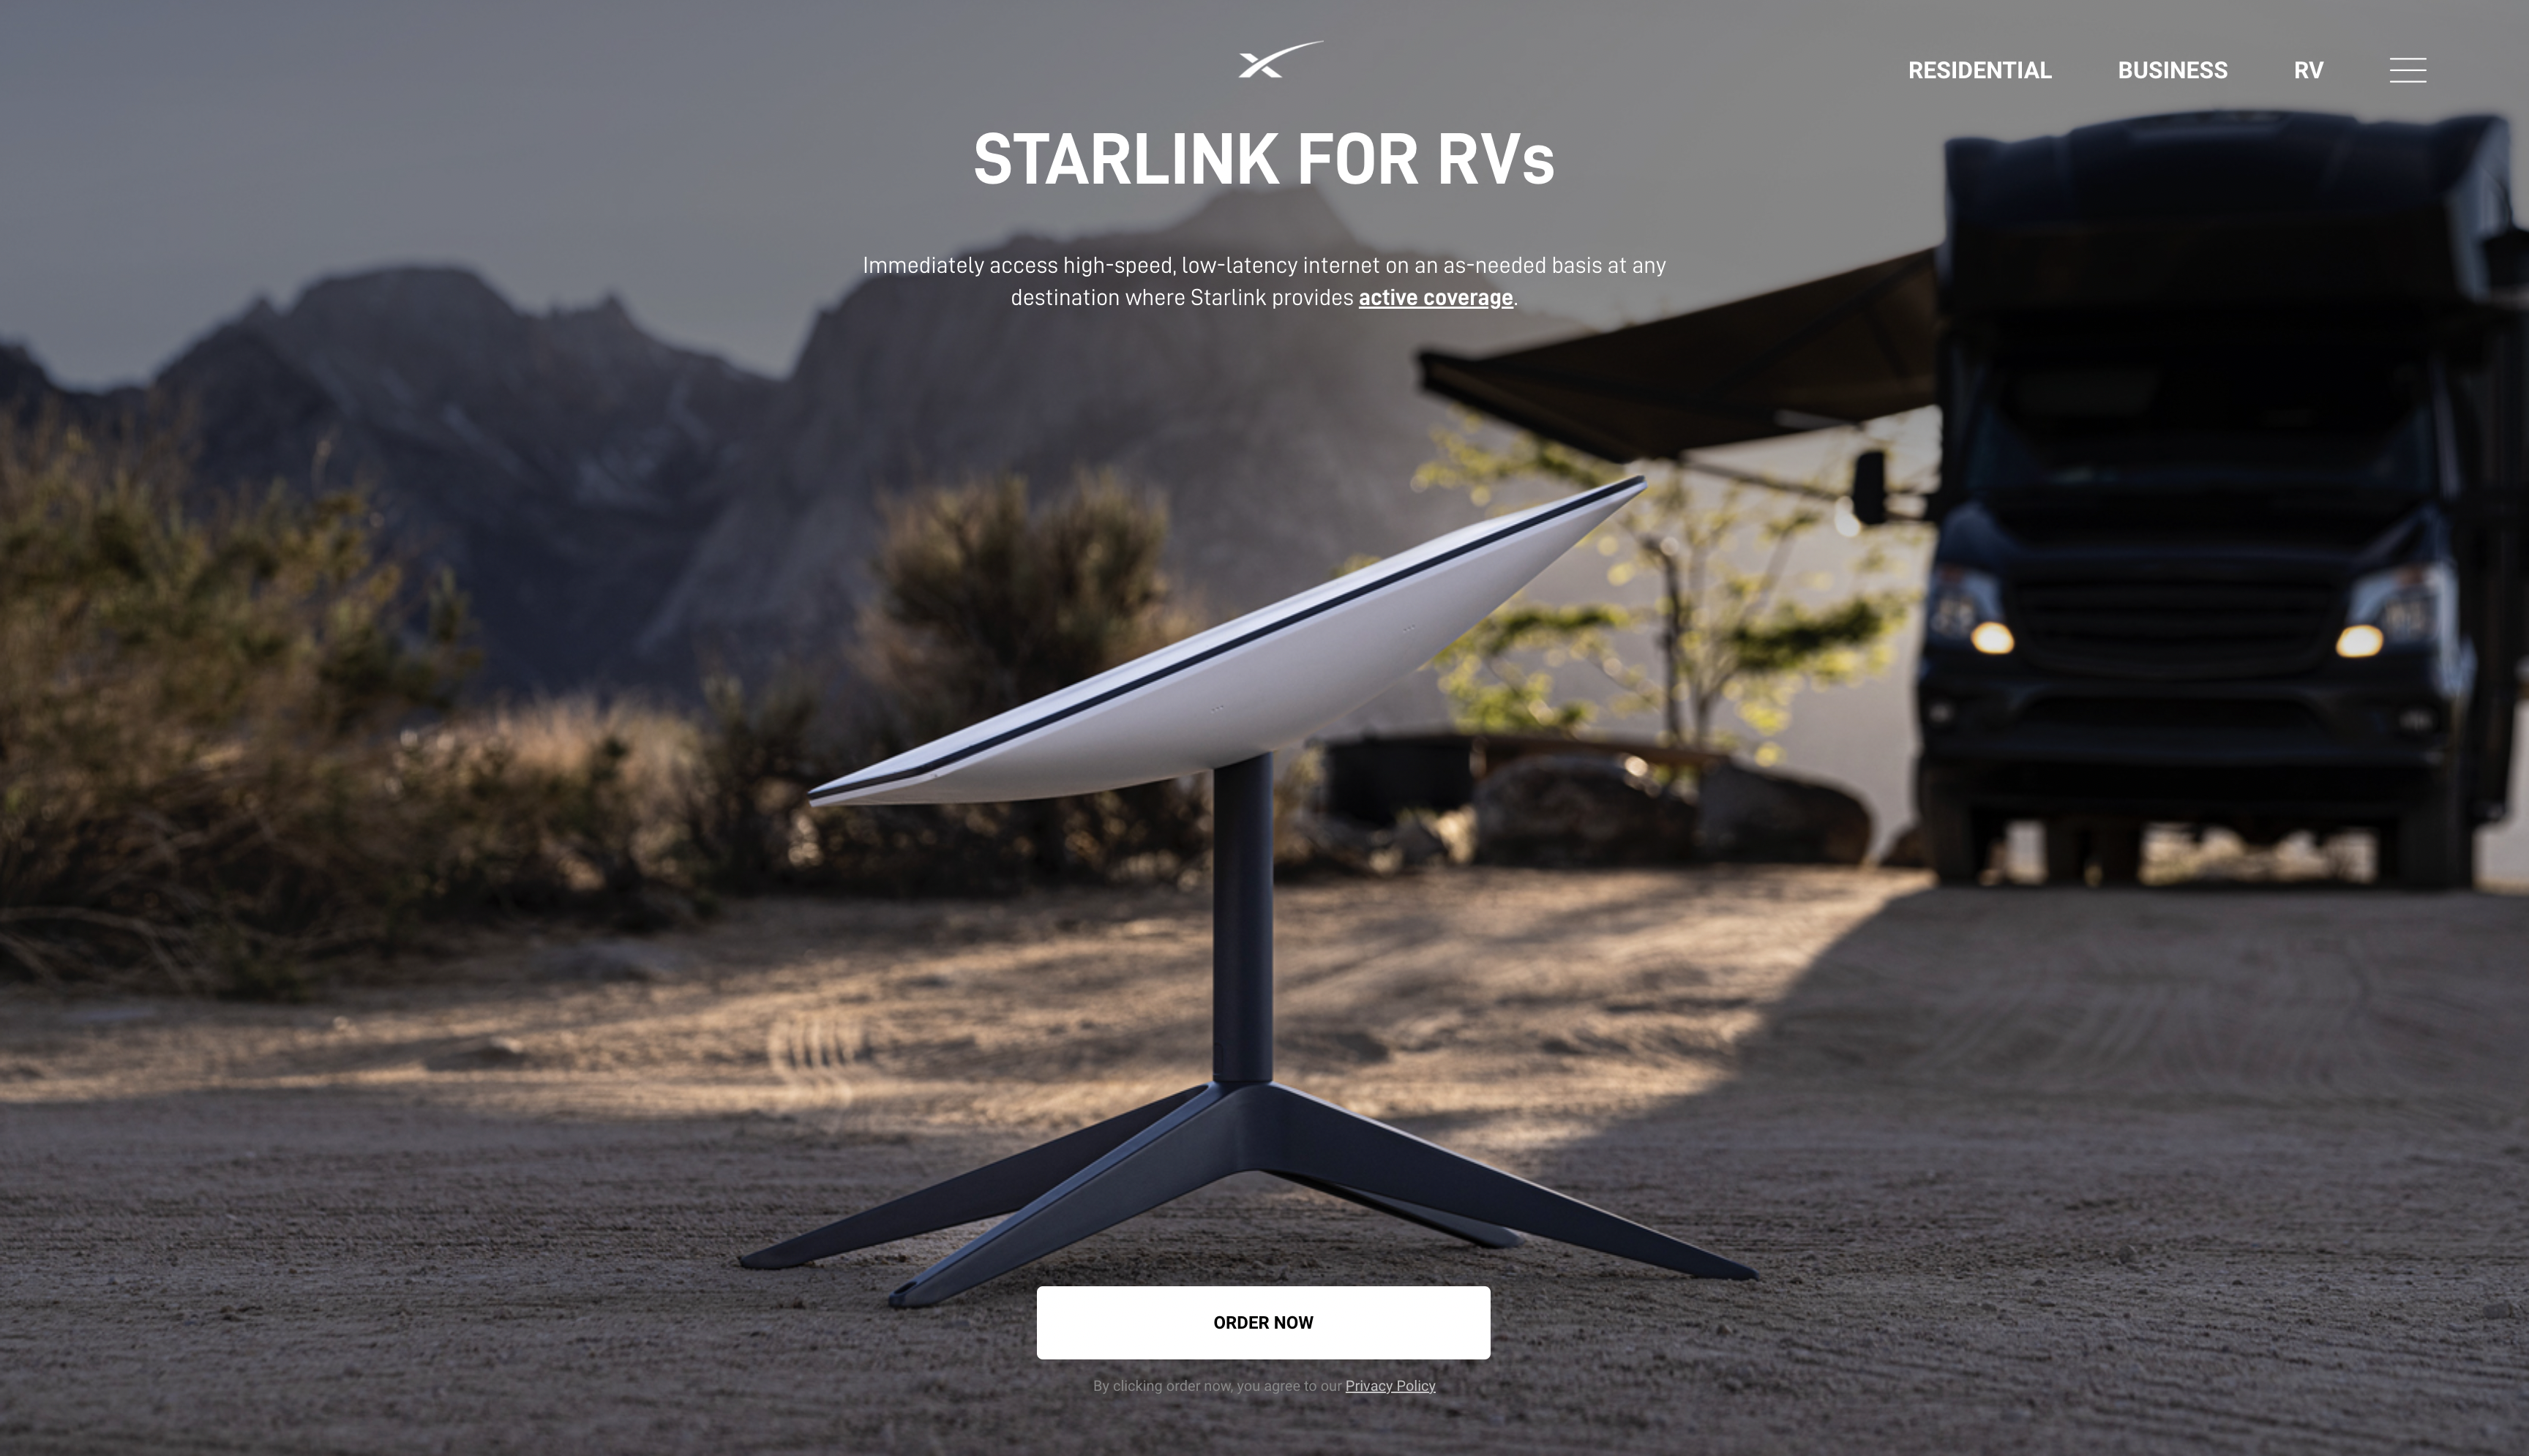 Starlink for RVs is Official and Available Immediately!